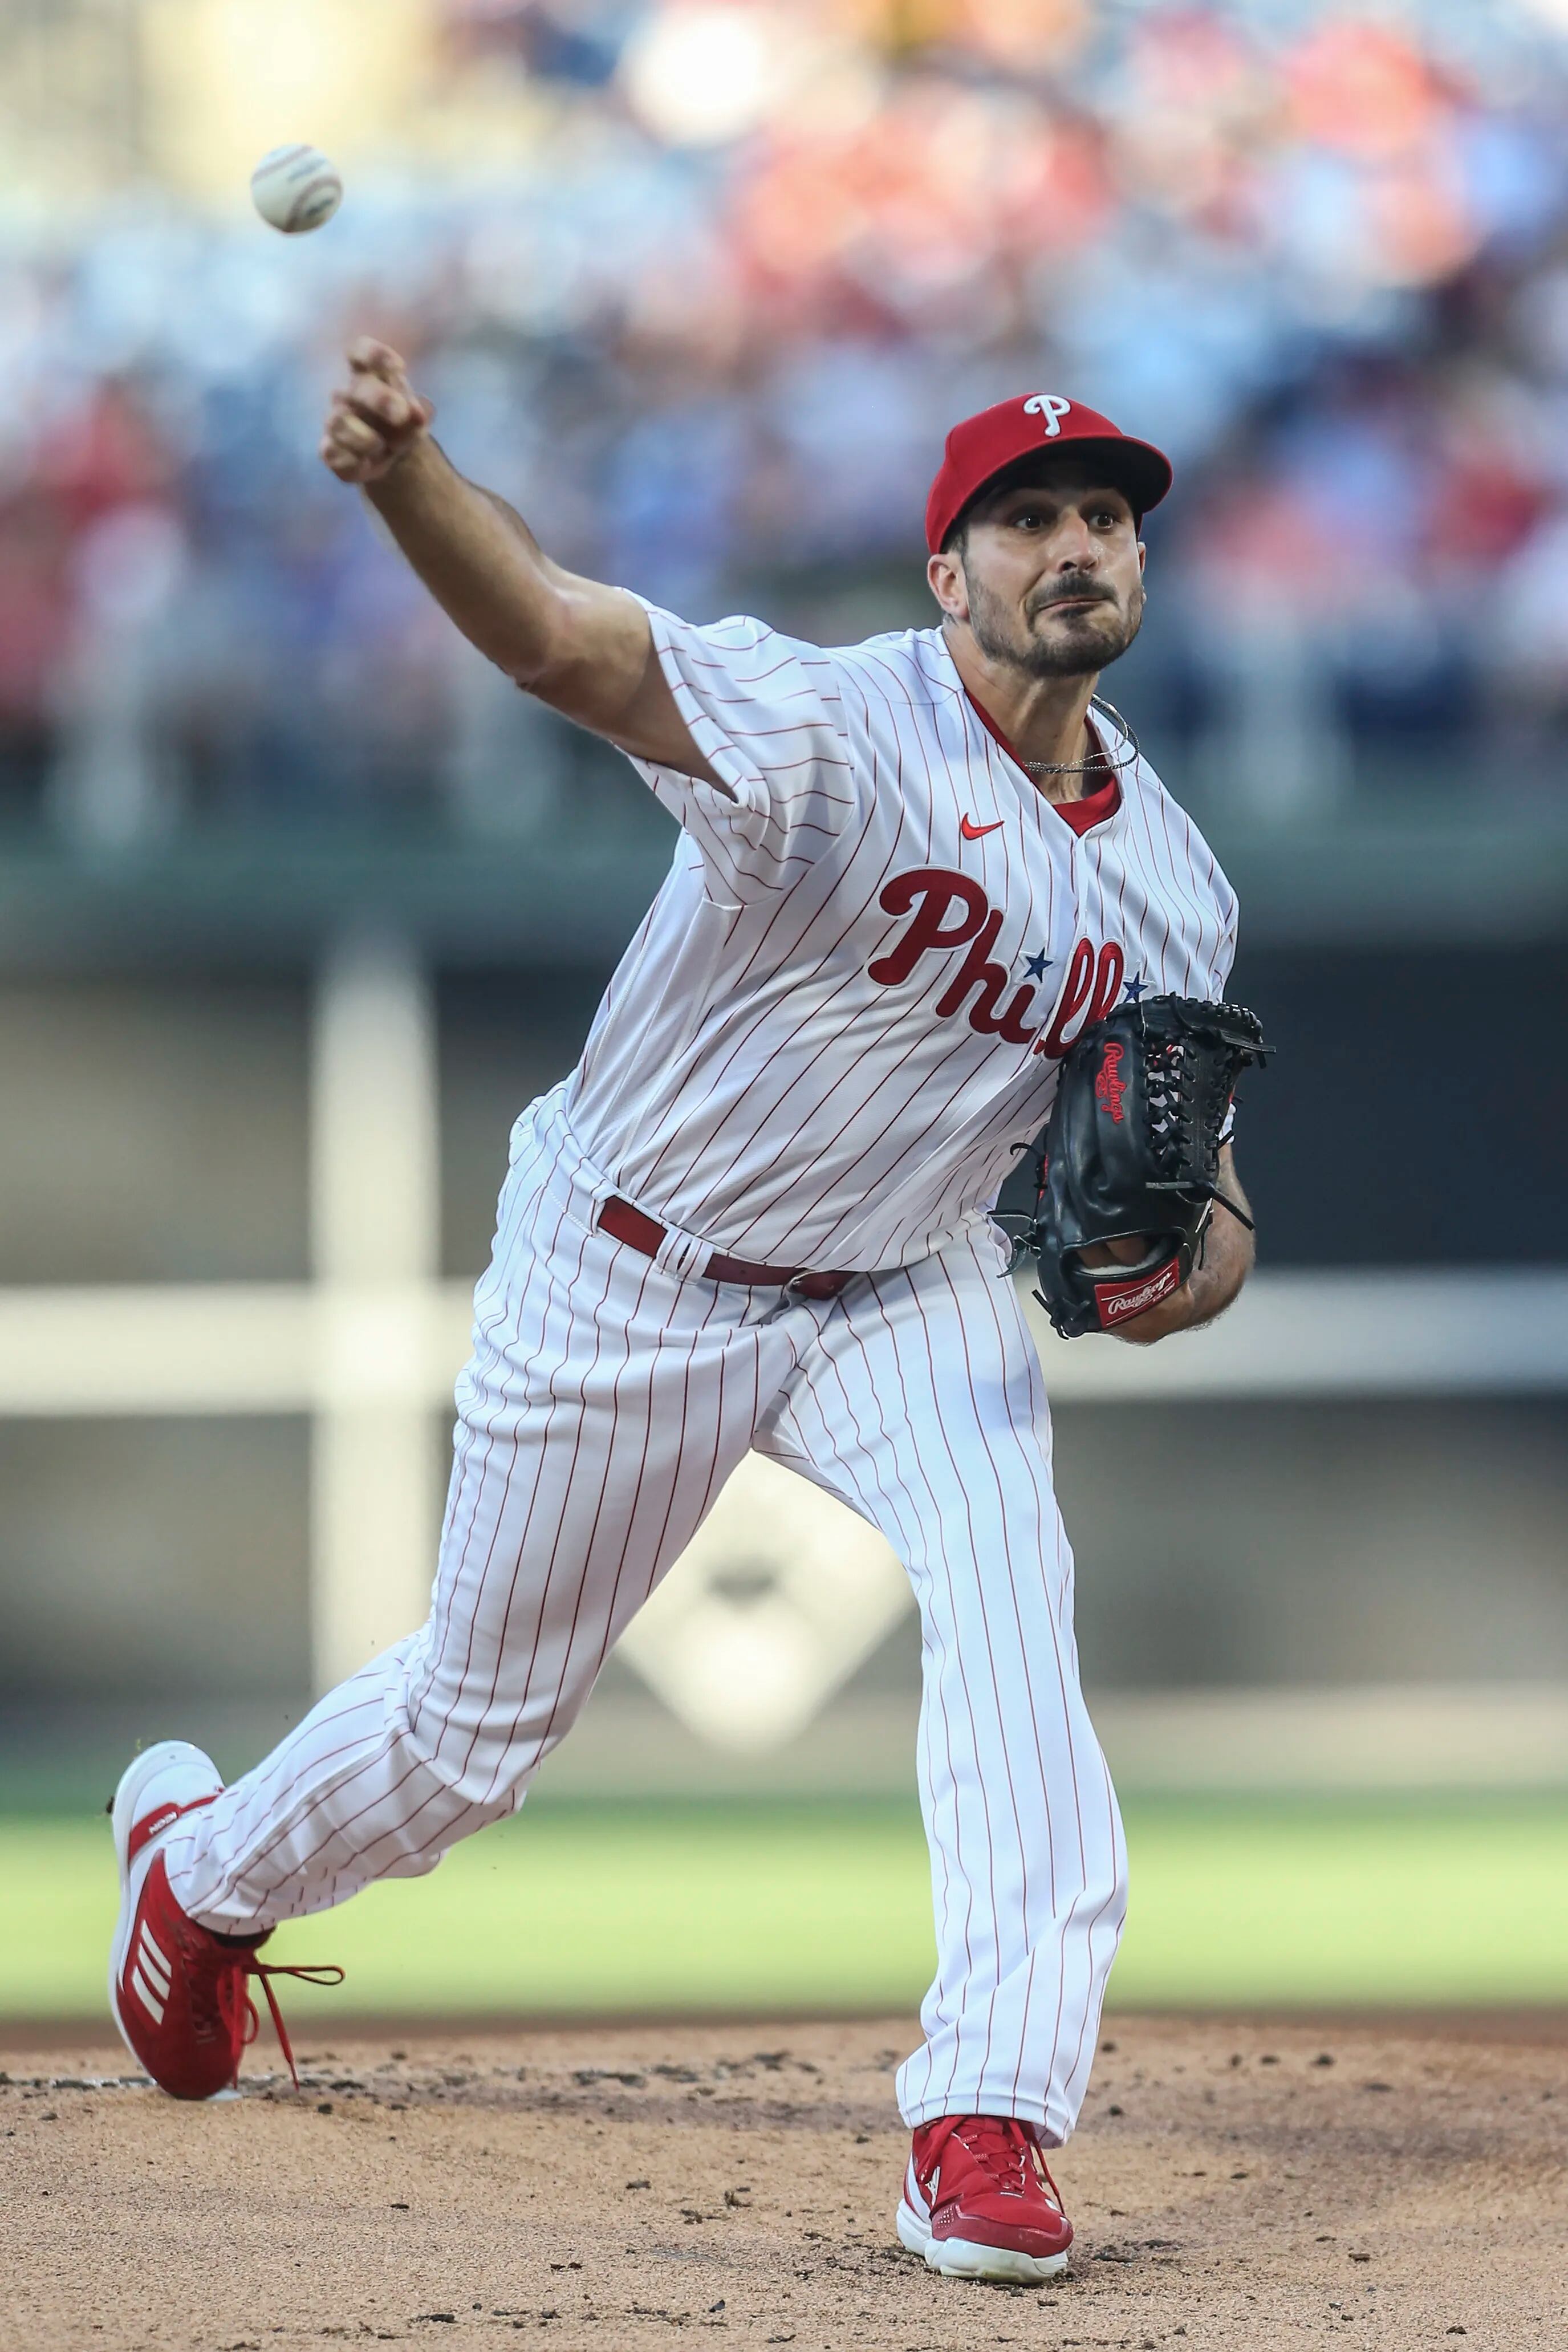 Phillies Pitch Great in June while Sixers, Flyers grab Headlines